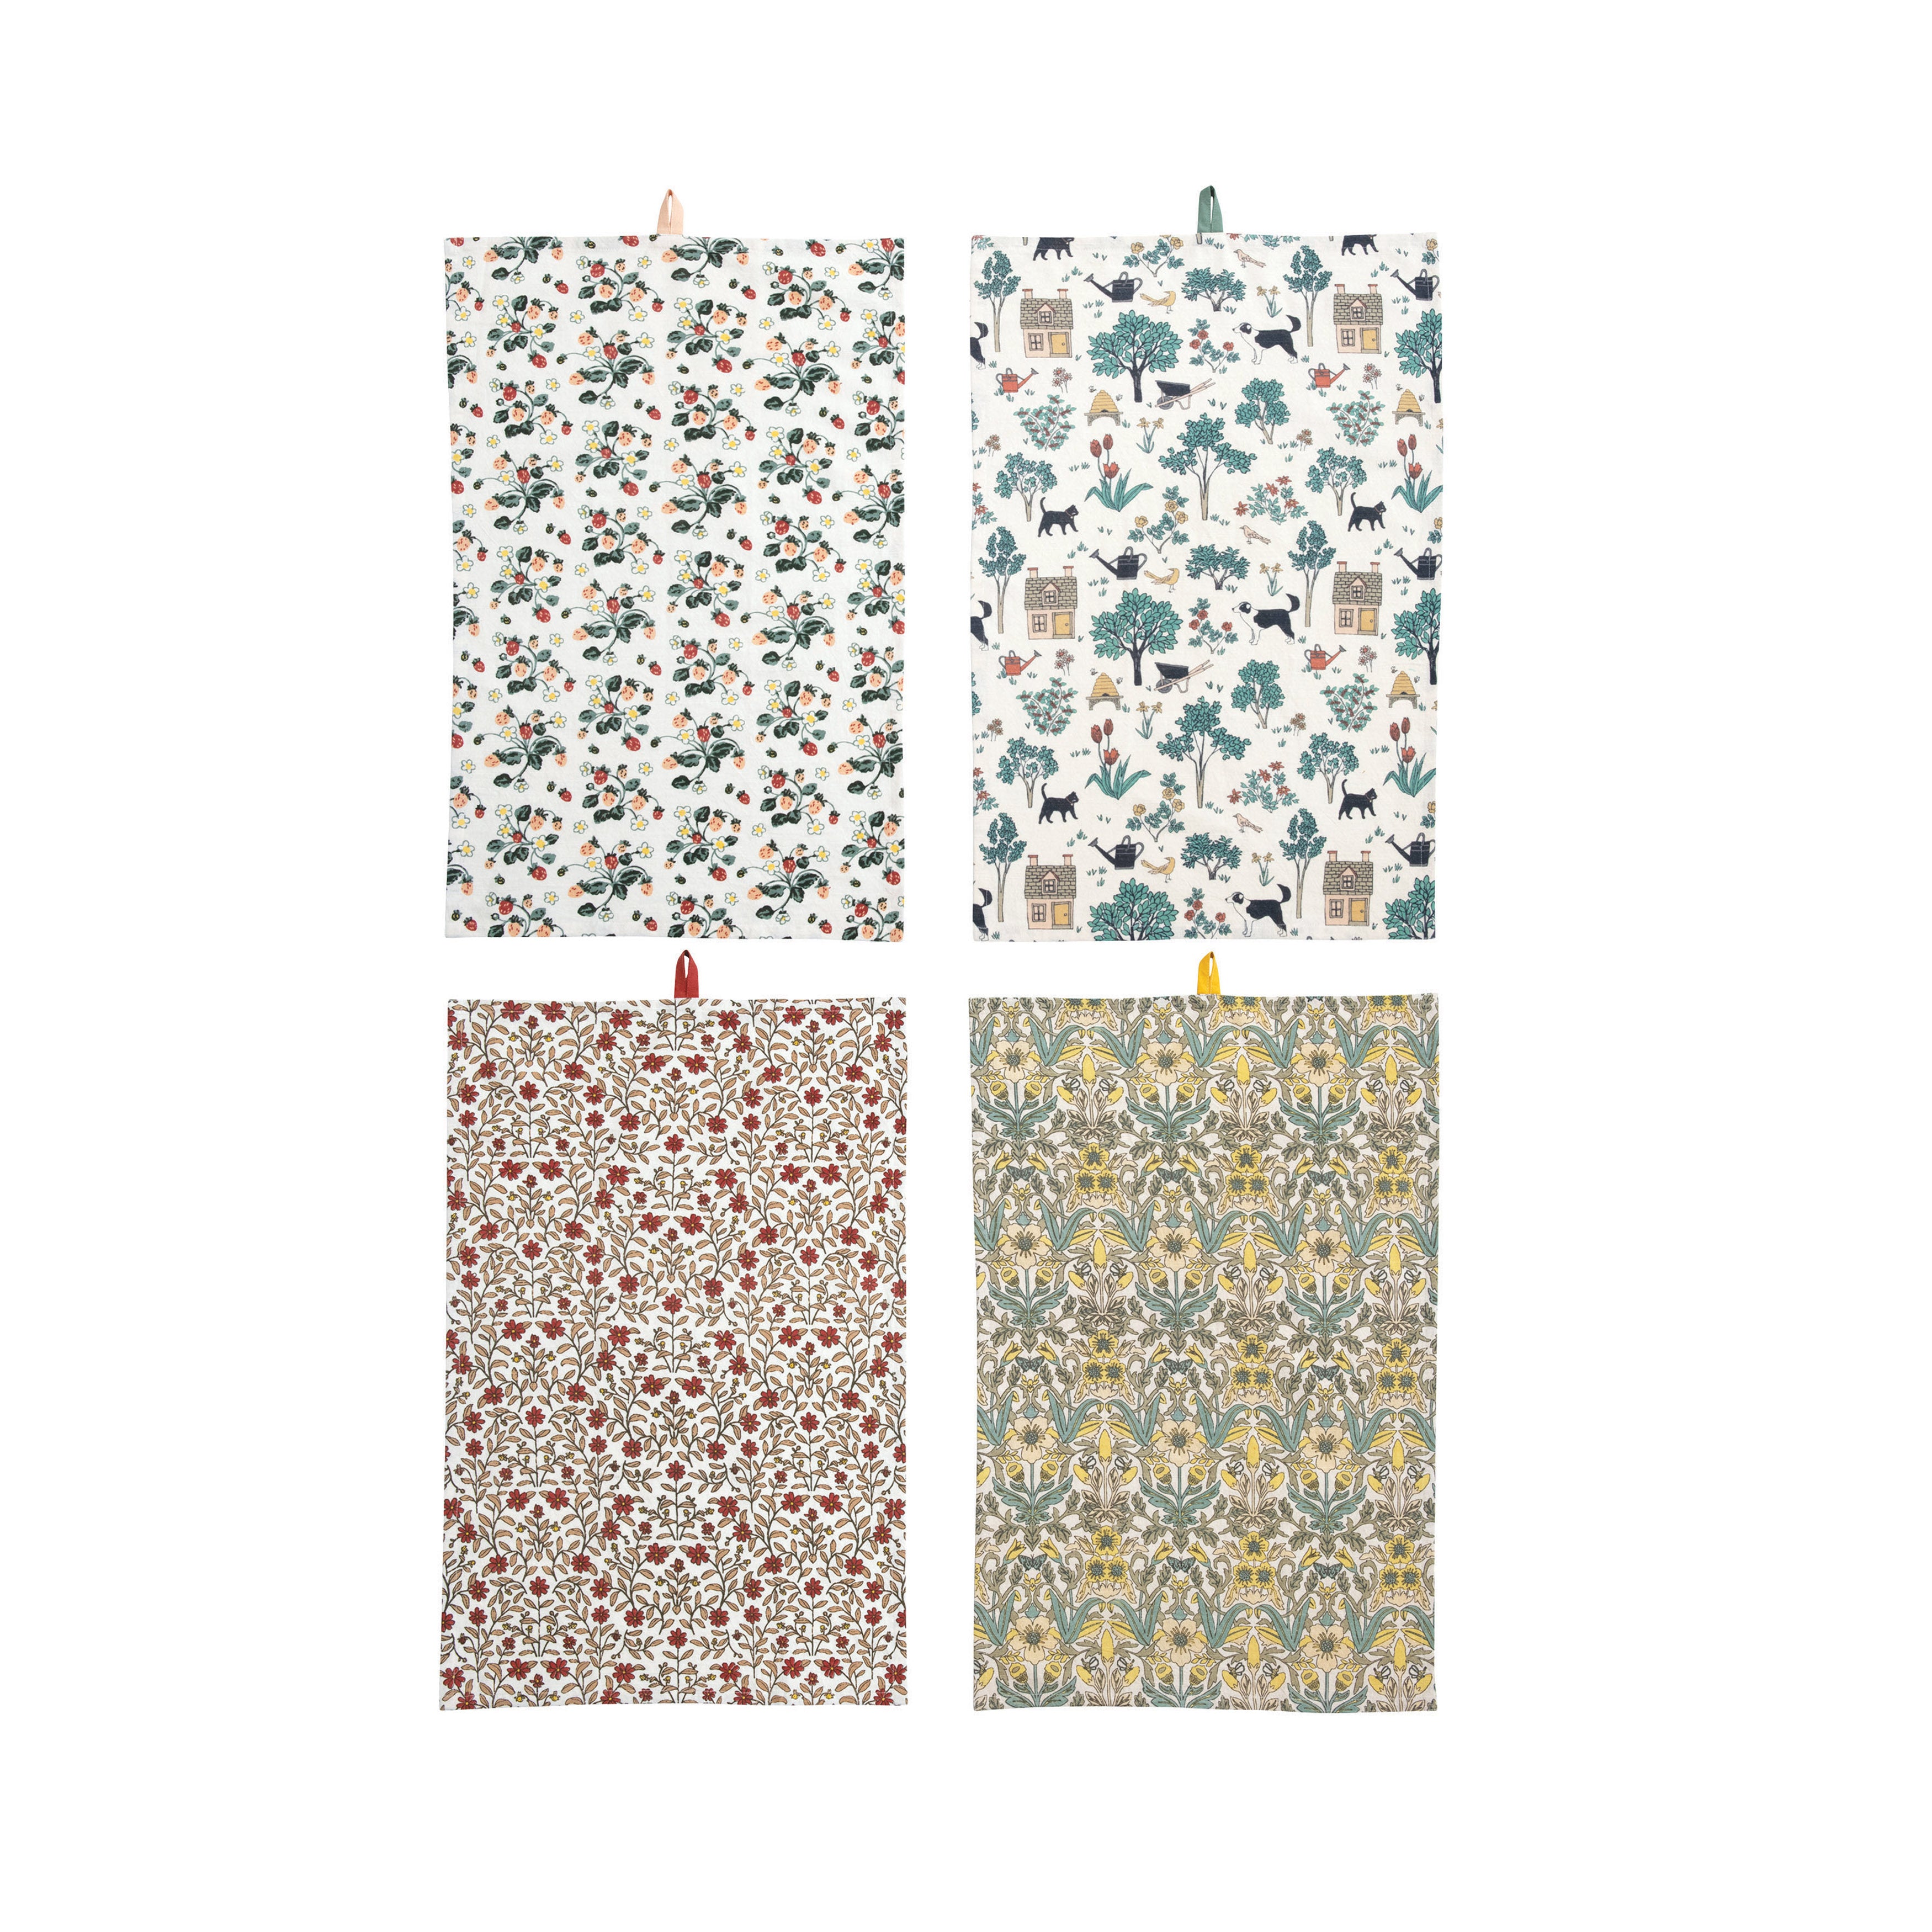 Cotton Printed Tea Towels with Pattern, 4 Styles